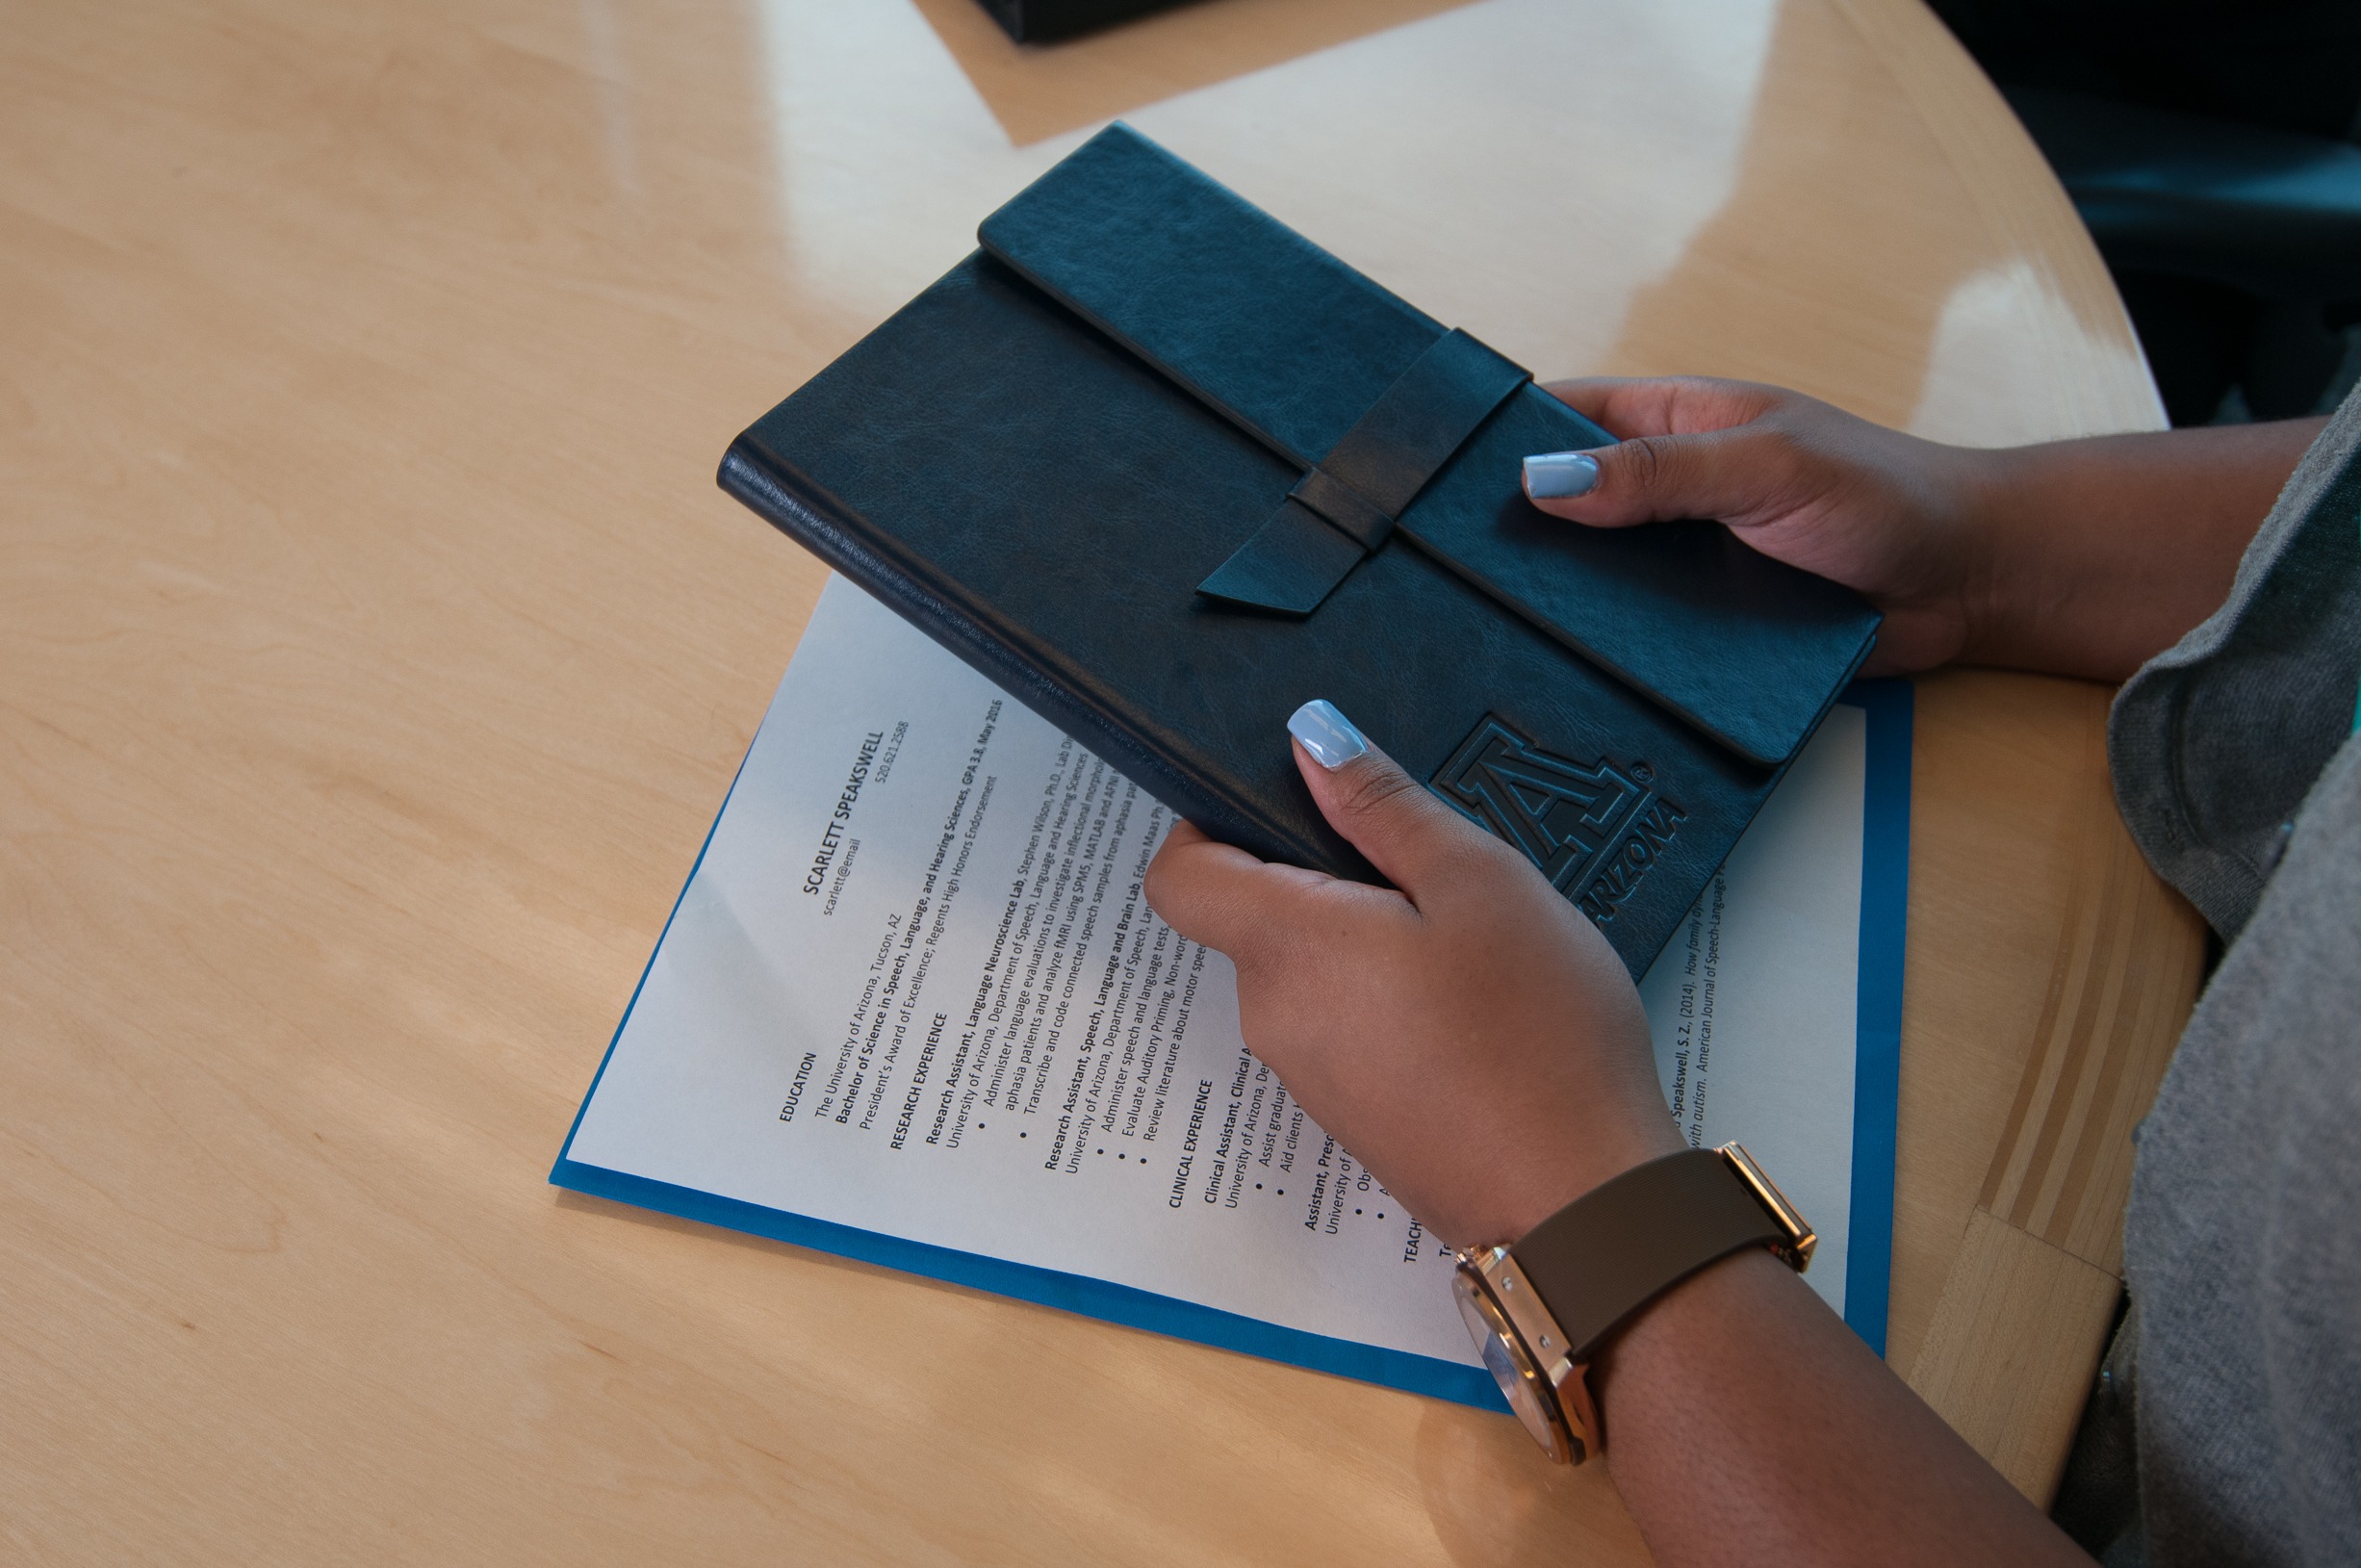 A person holding a black planner with the University of Arizona "A" logo on it.